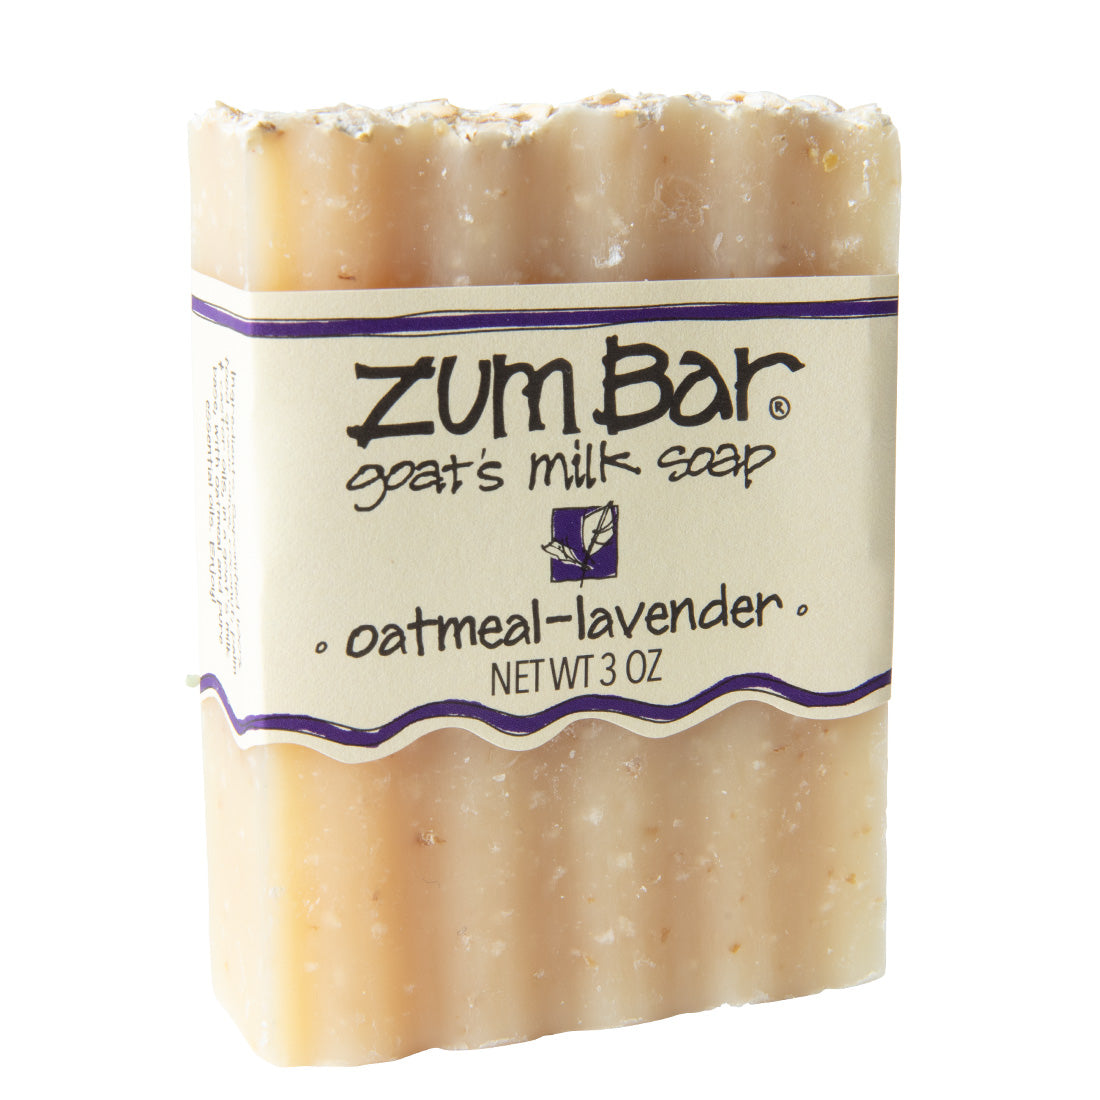 Labeled oatmeal-lavender Zum Bar Soap with cream coloring speckled with oatmeal.